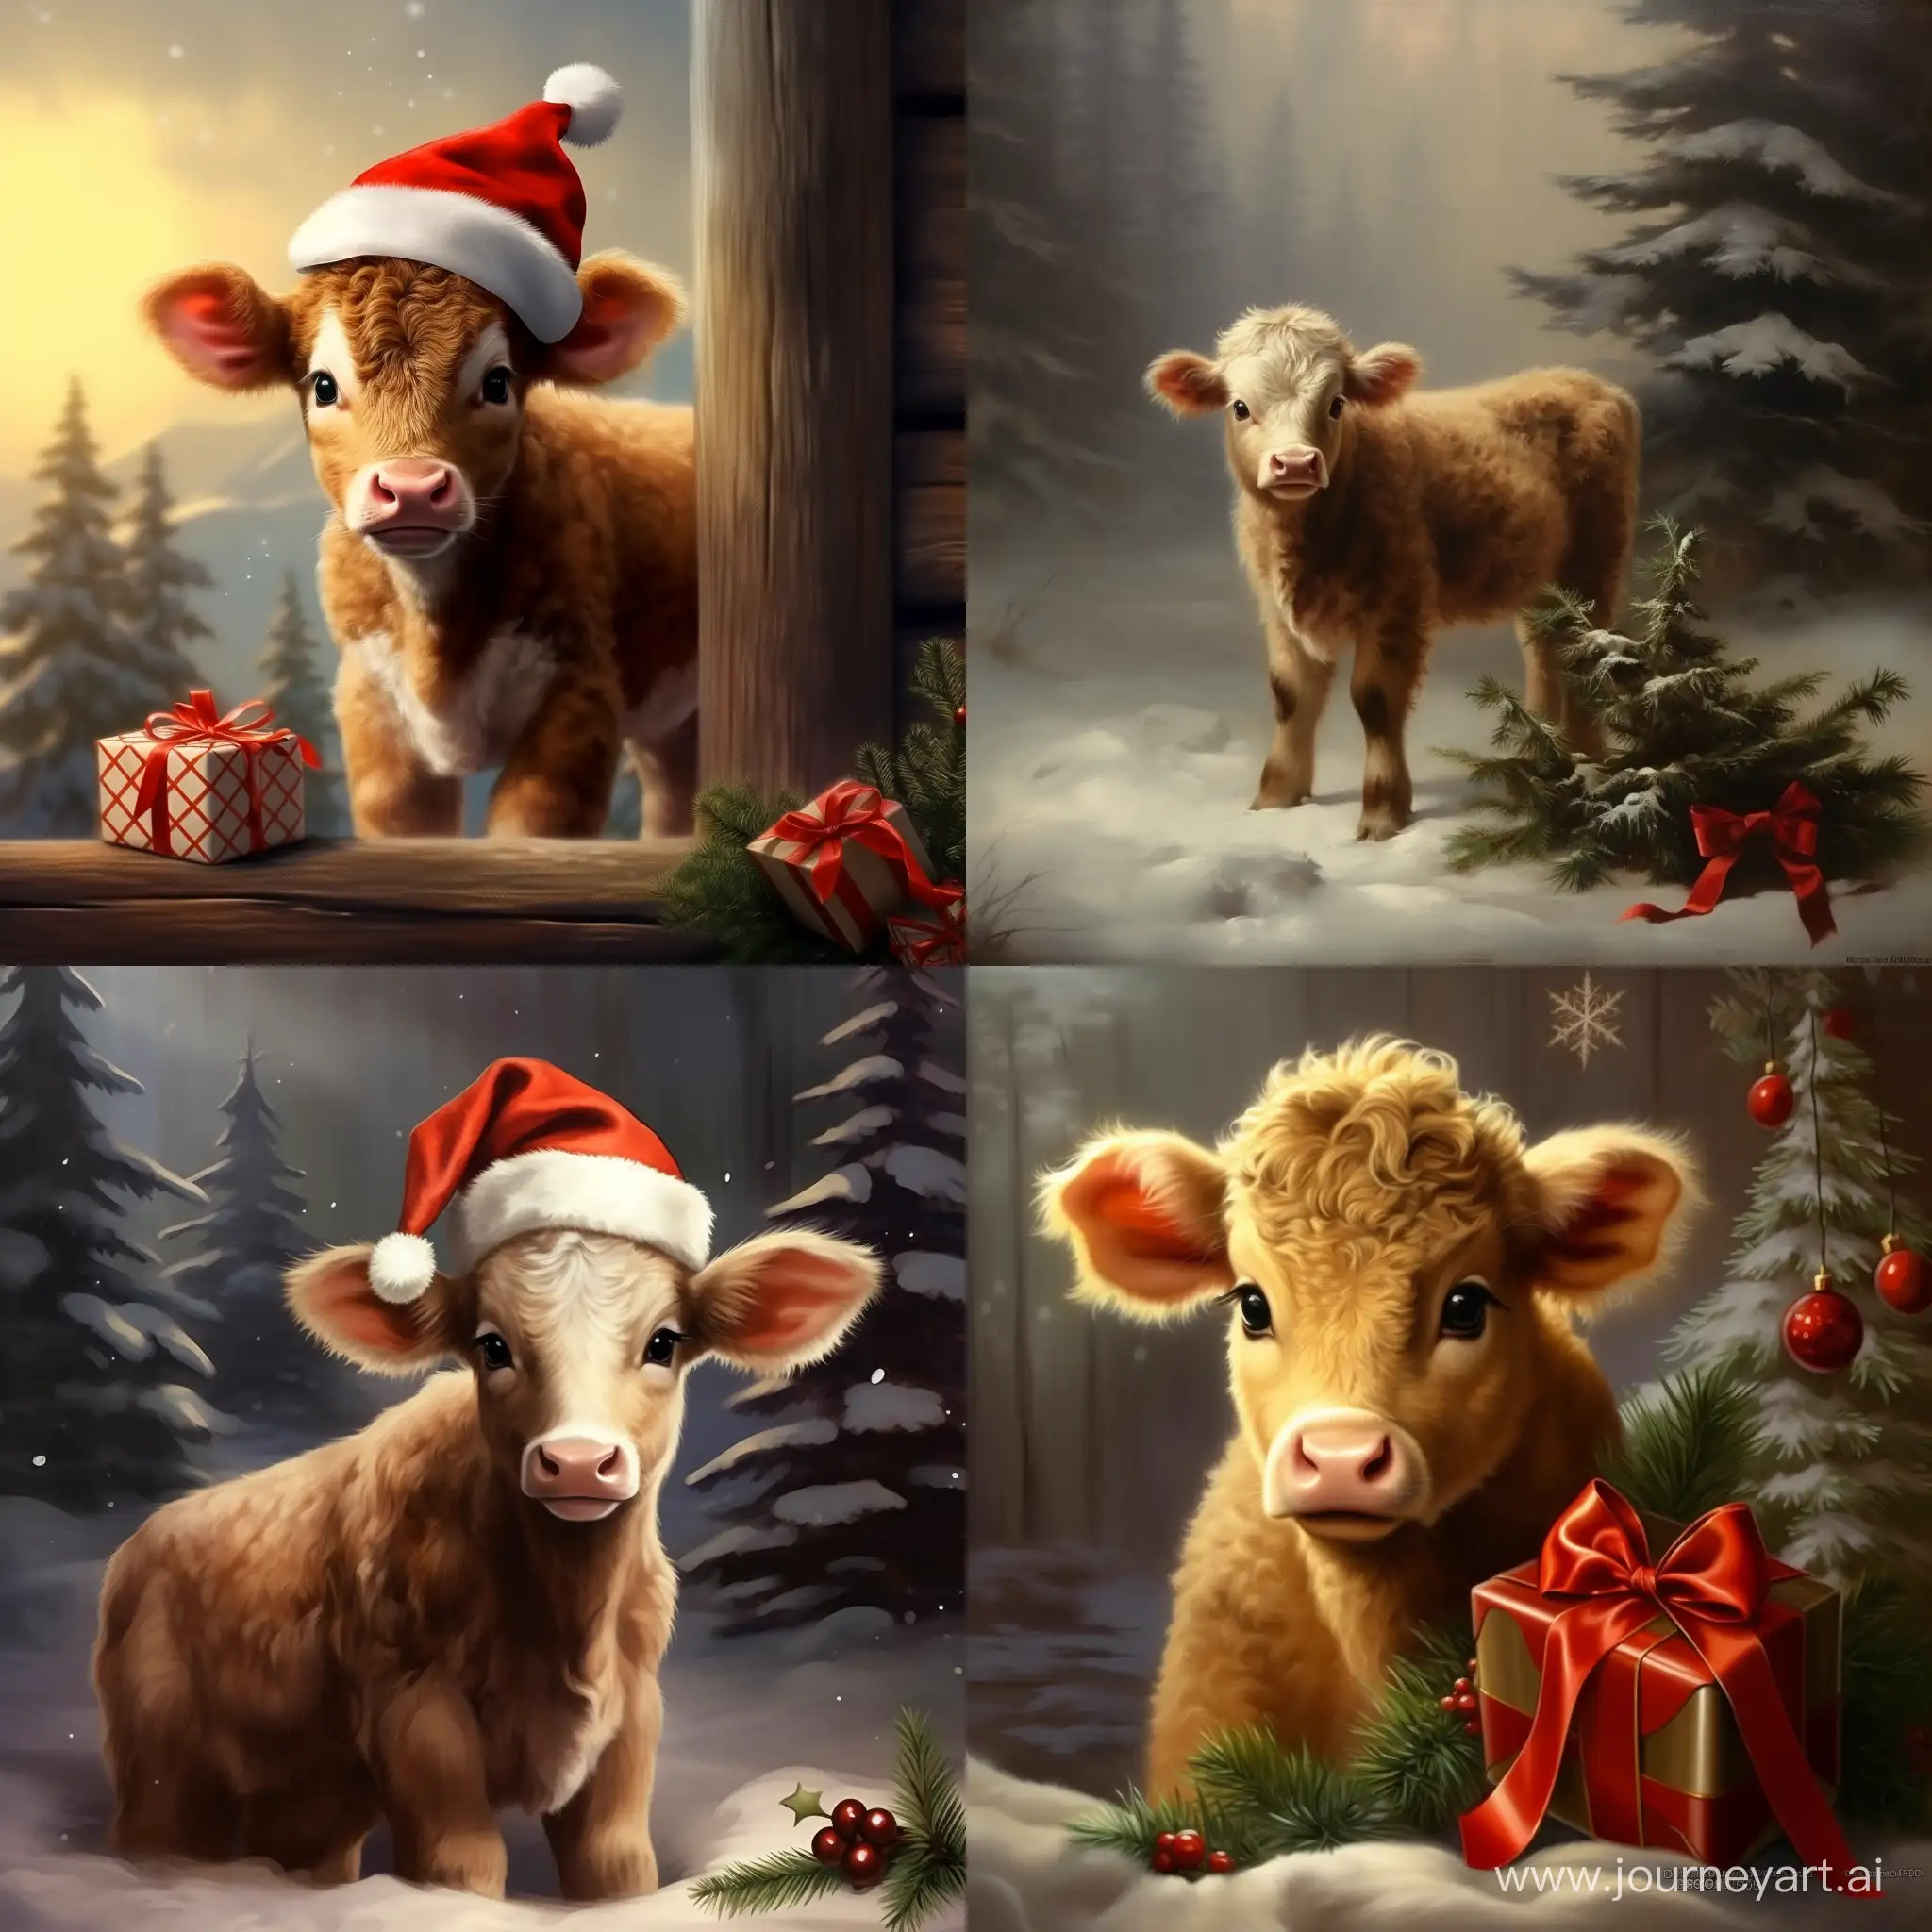 Adorable-Alpine-Calf-Celebrating-New-Year-with-Festive-Hat-Gifts-and-Fir-Tree